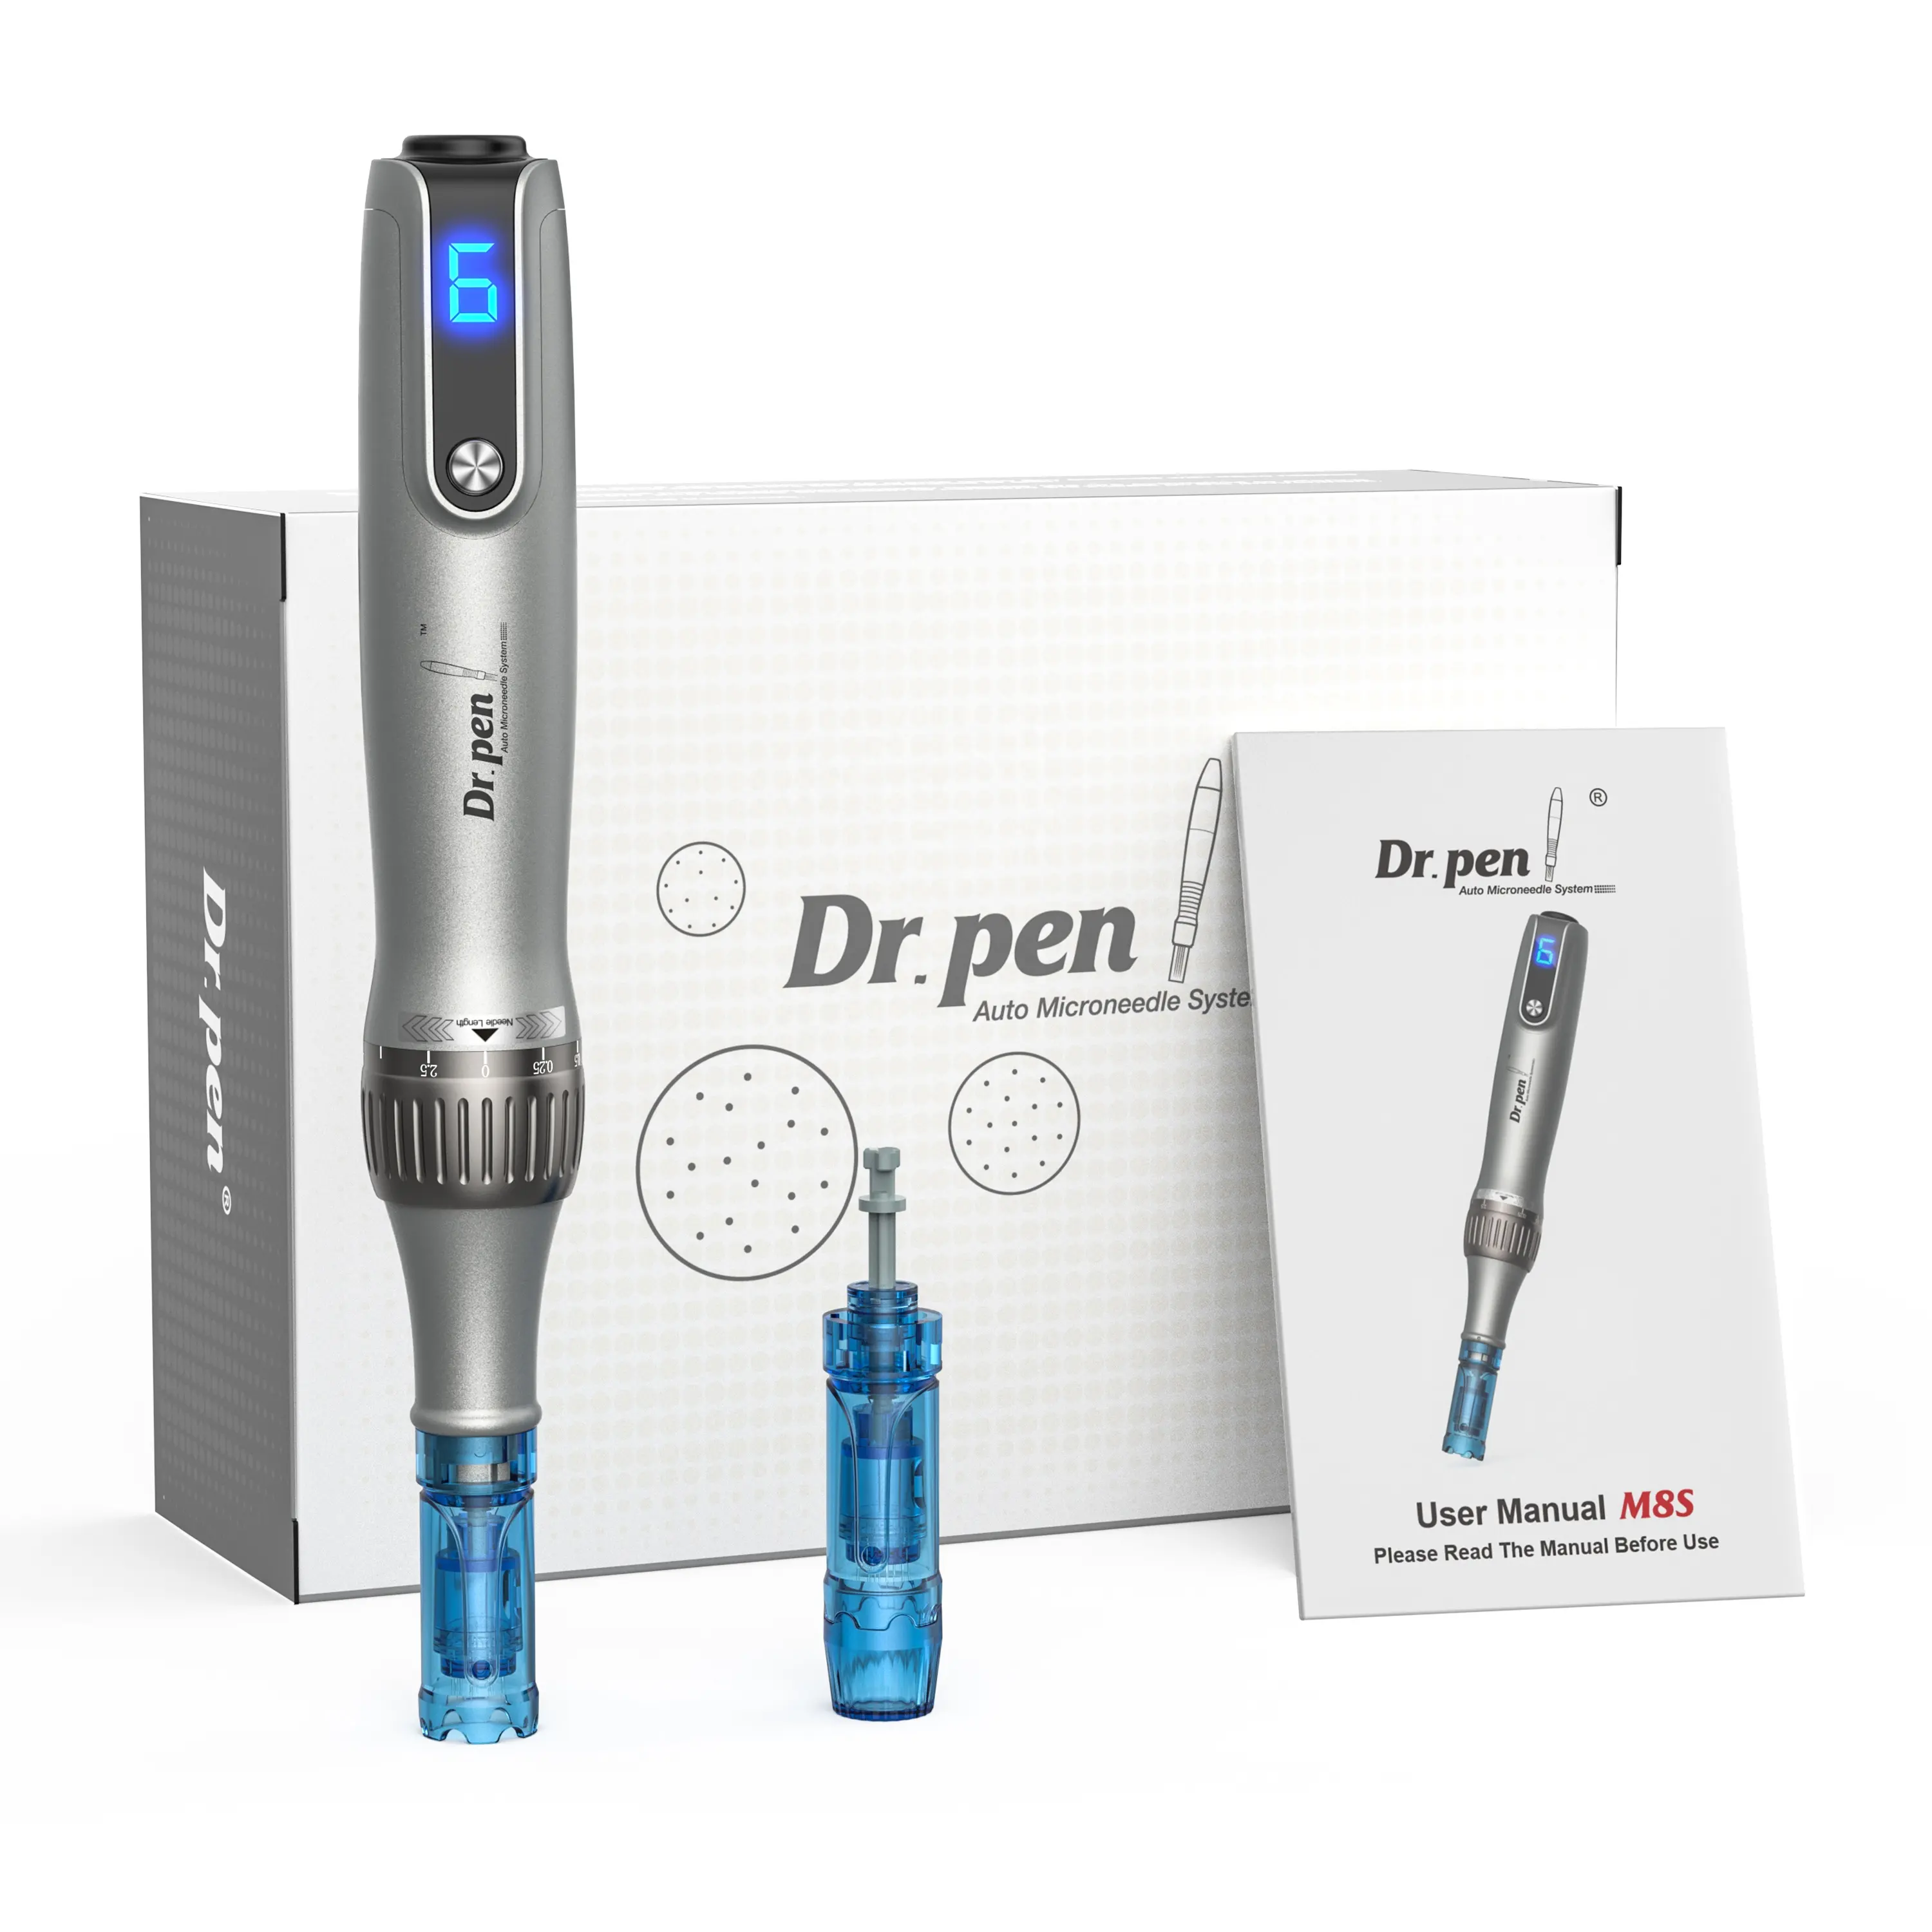 Dr.pen M8S Home use microneedling home use beauty equipment anti wrinkle derma rolling system